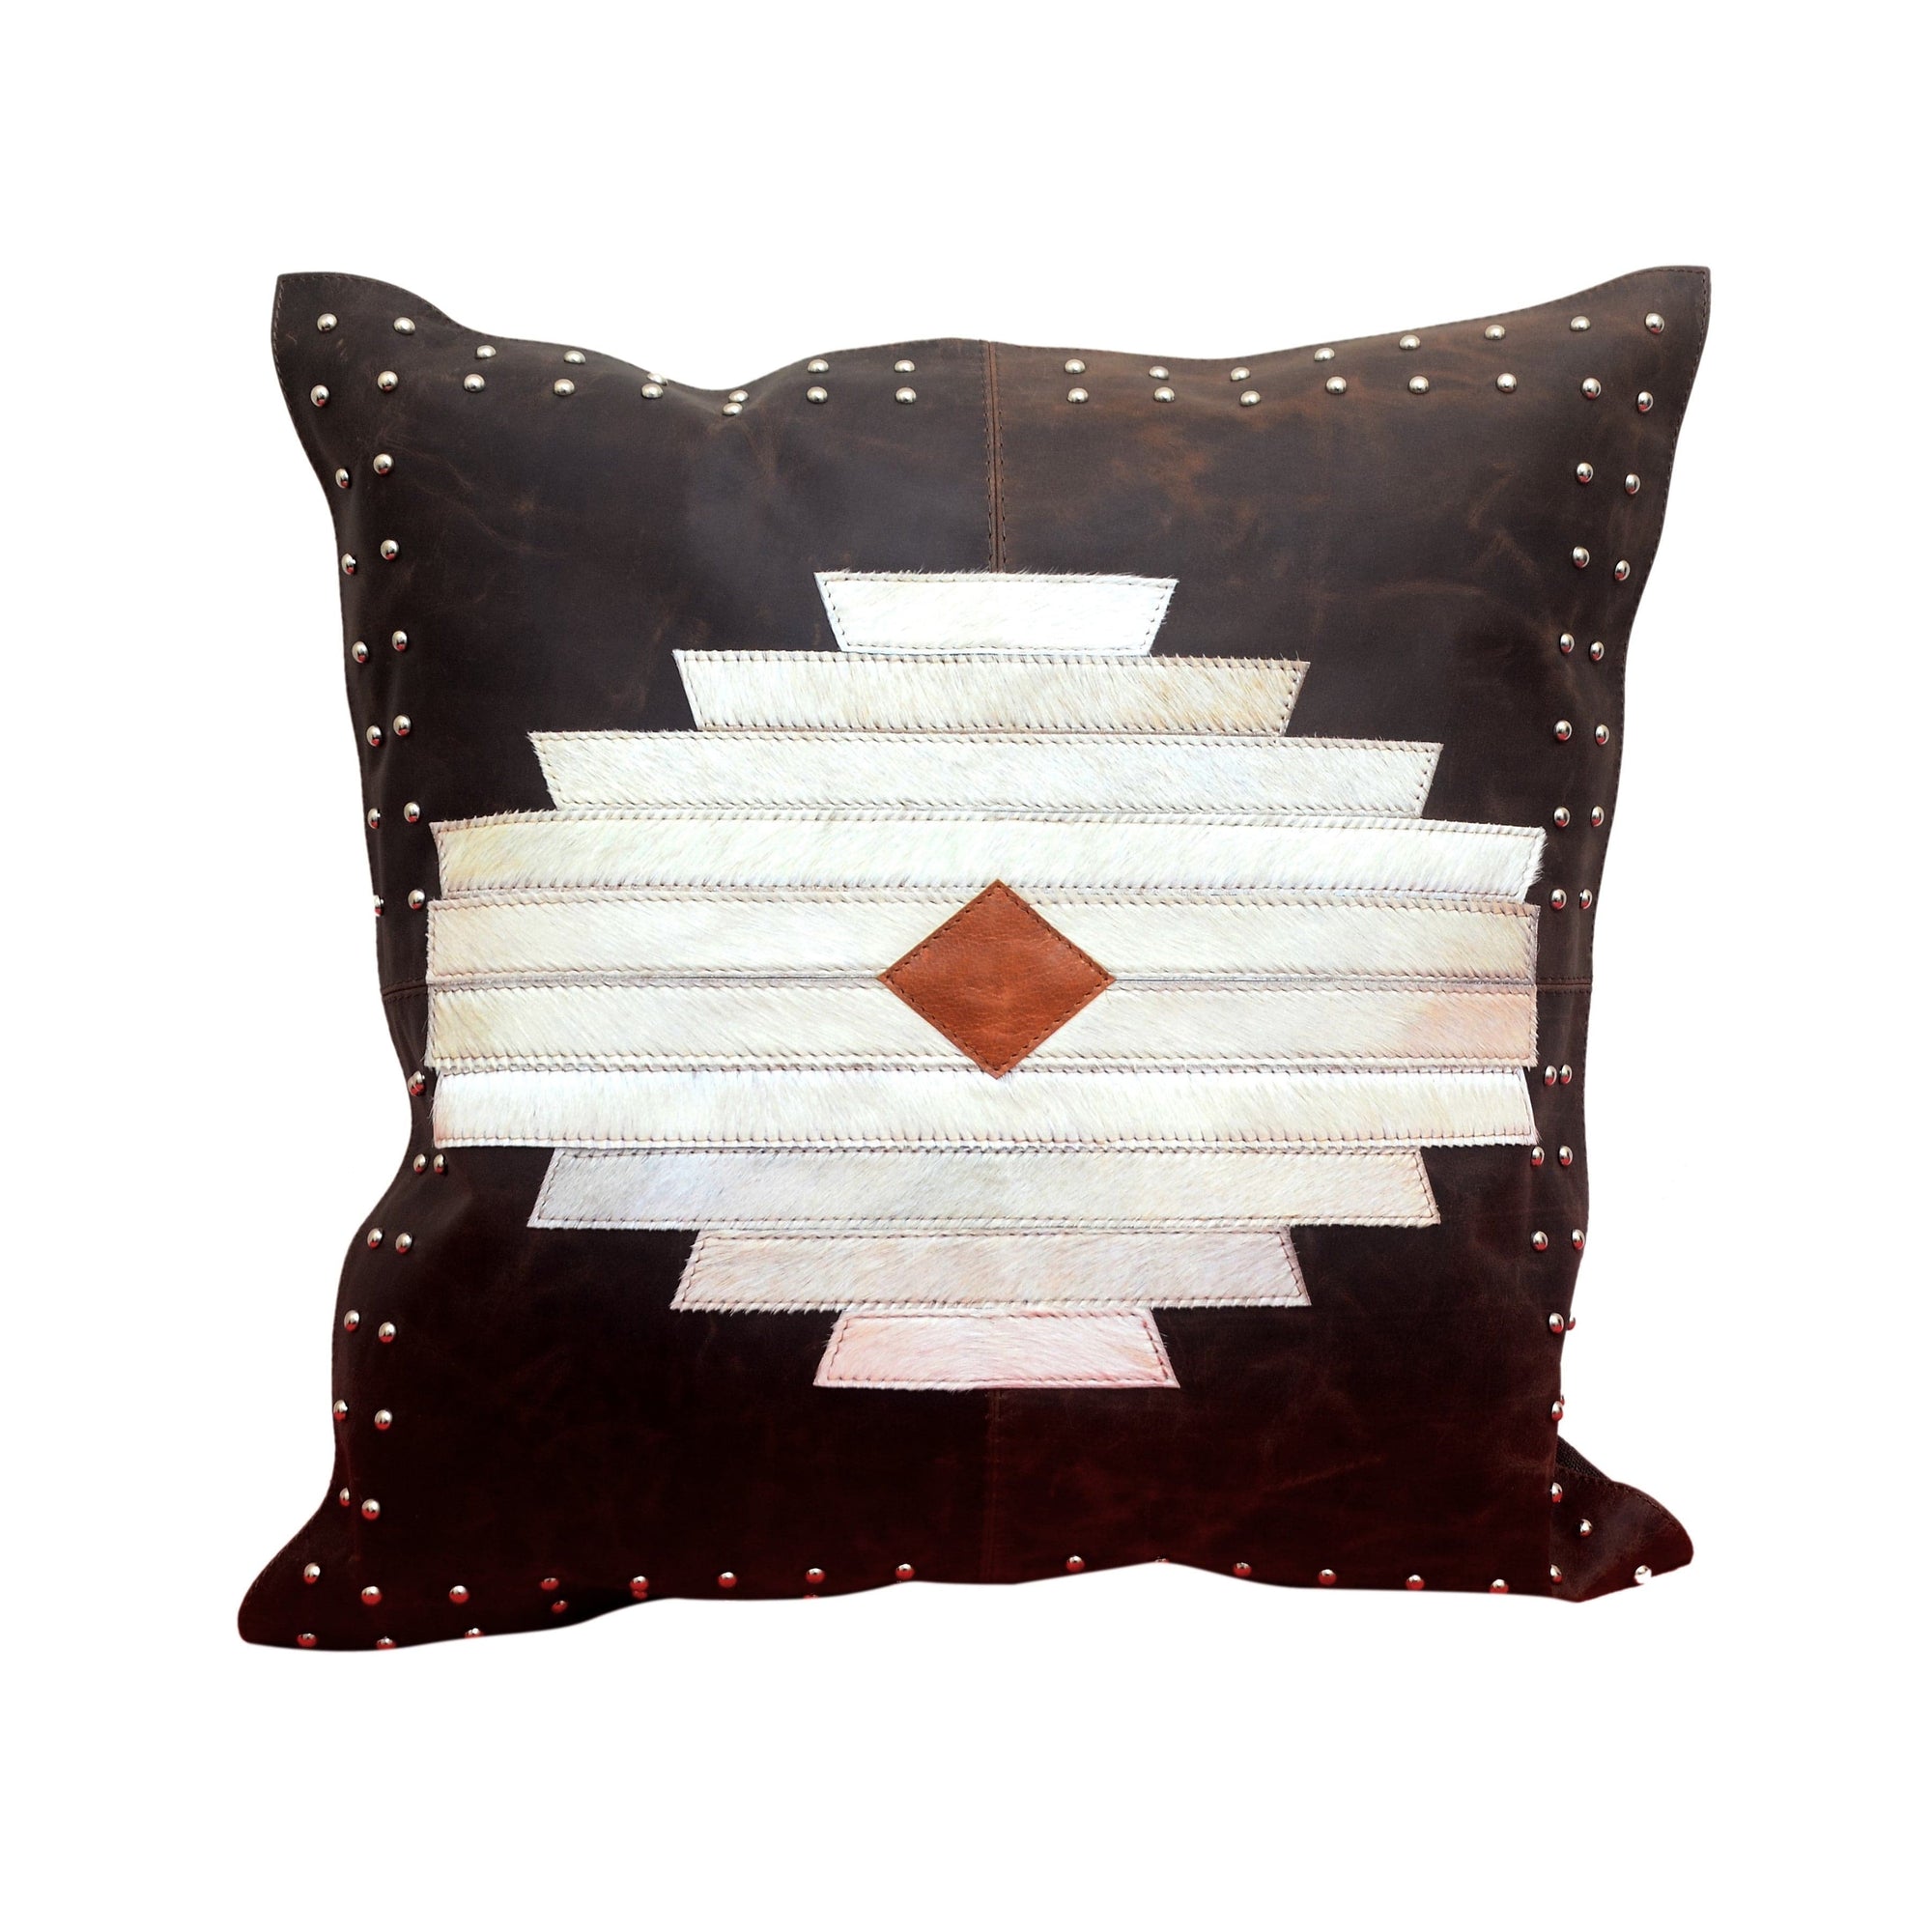 Aztec Genuine Leather & Hide Throw Pillow, 20x20 Leather Pillow